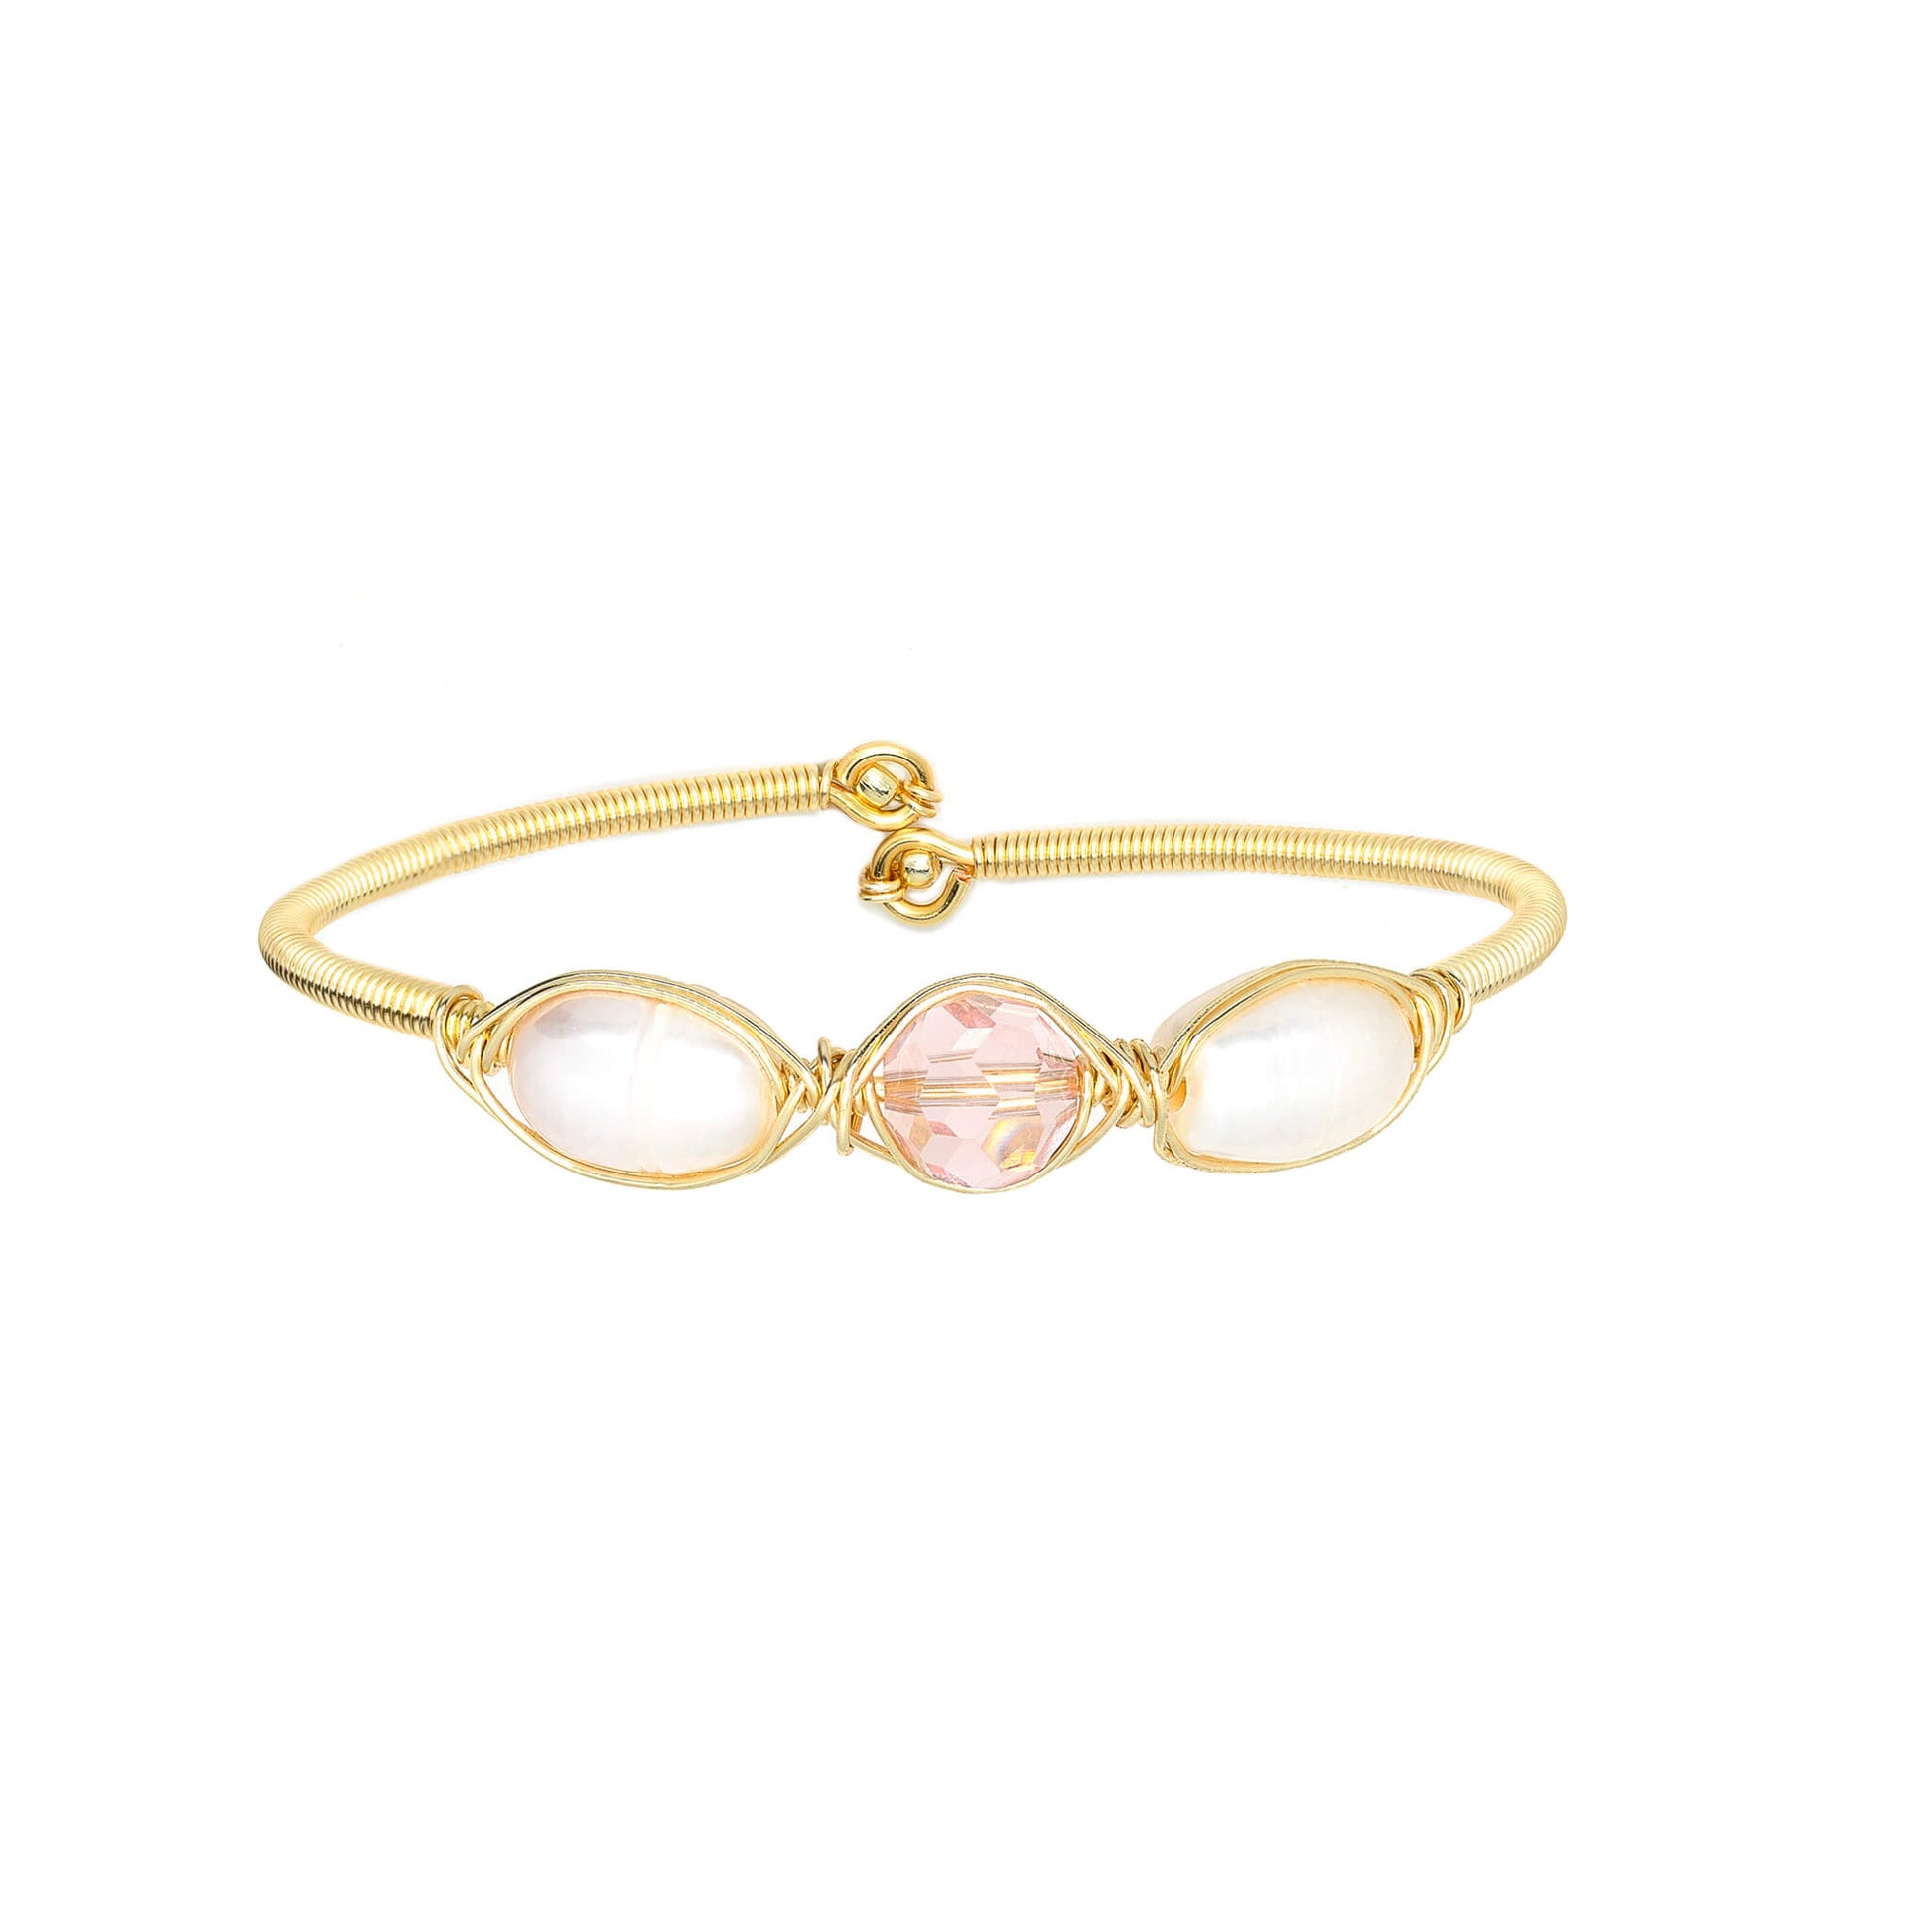 October Birthstone Crystal Gold Bracelet. Light Pink Crystal, Fresh Water Pearls  and Non tarnish Gold color wire. Wire Wrapped Bracelet.